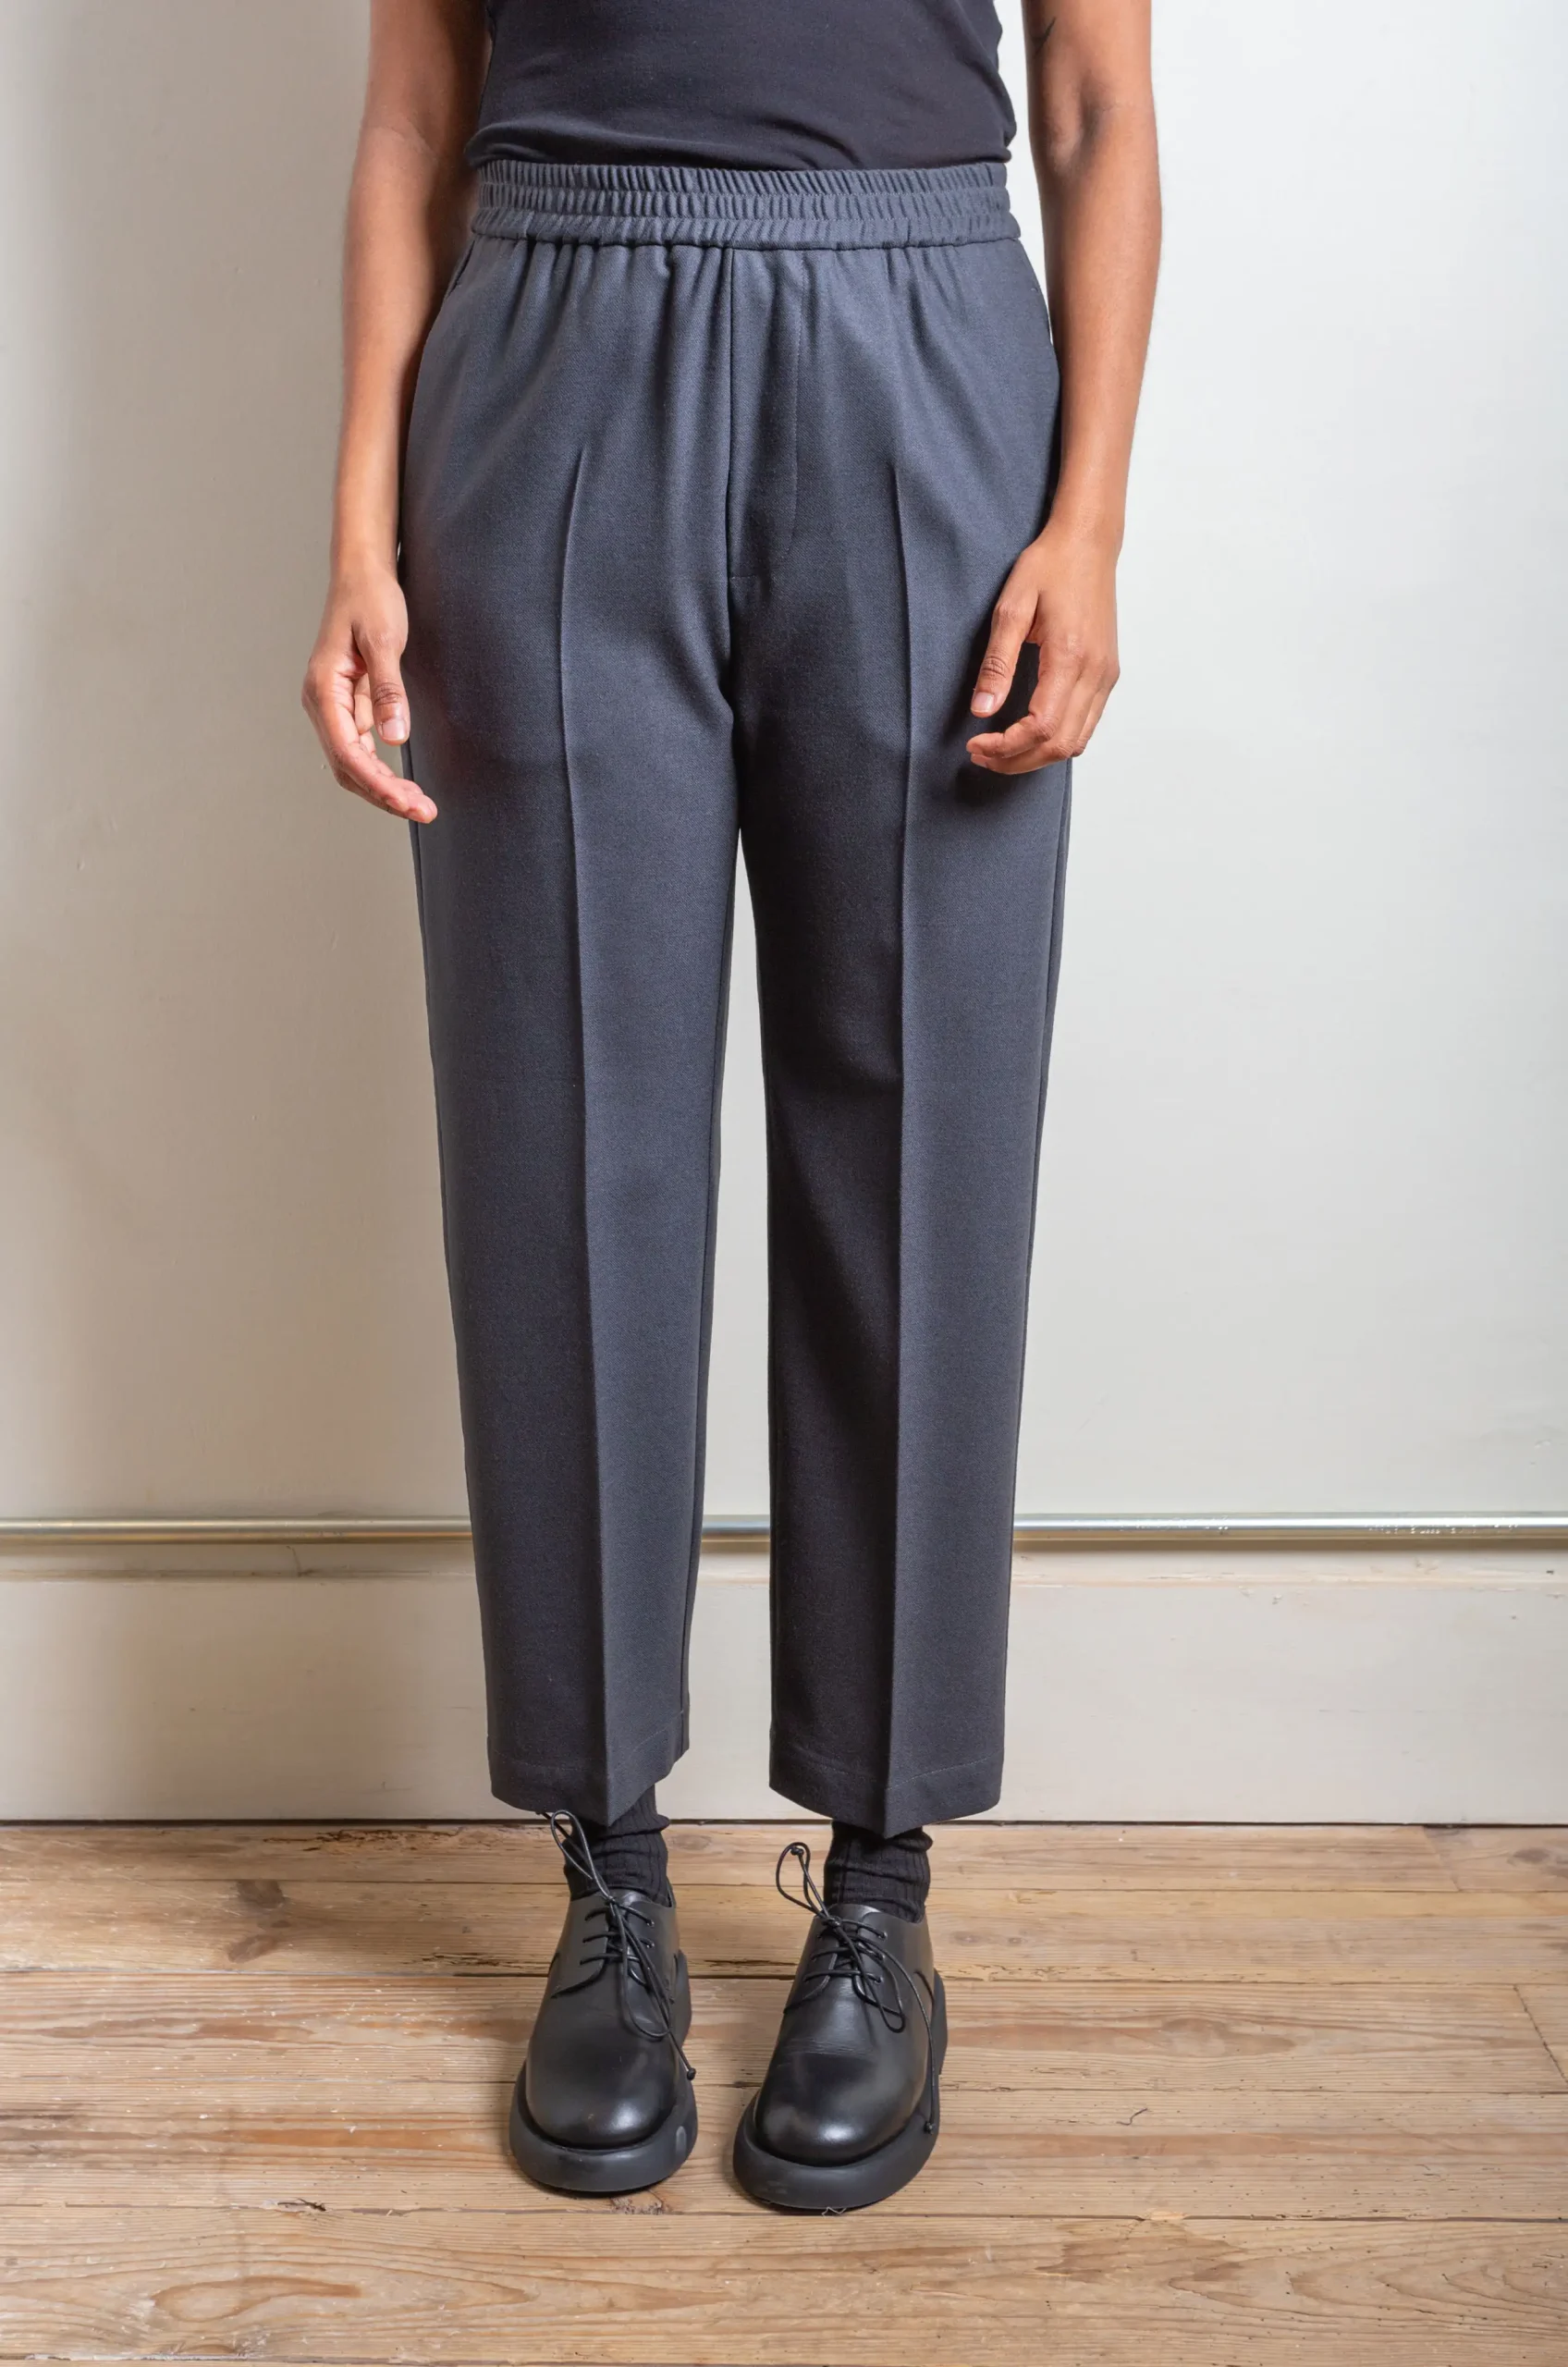 Barena - Women Trousers Alfonso Frare Piombo - Rendez-vous Store